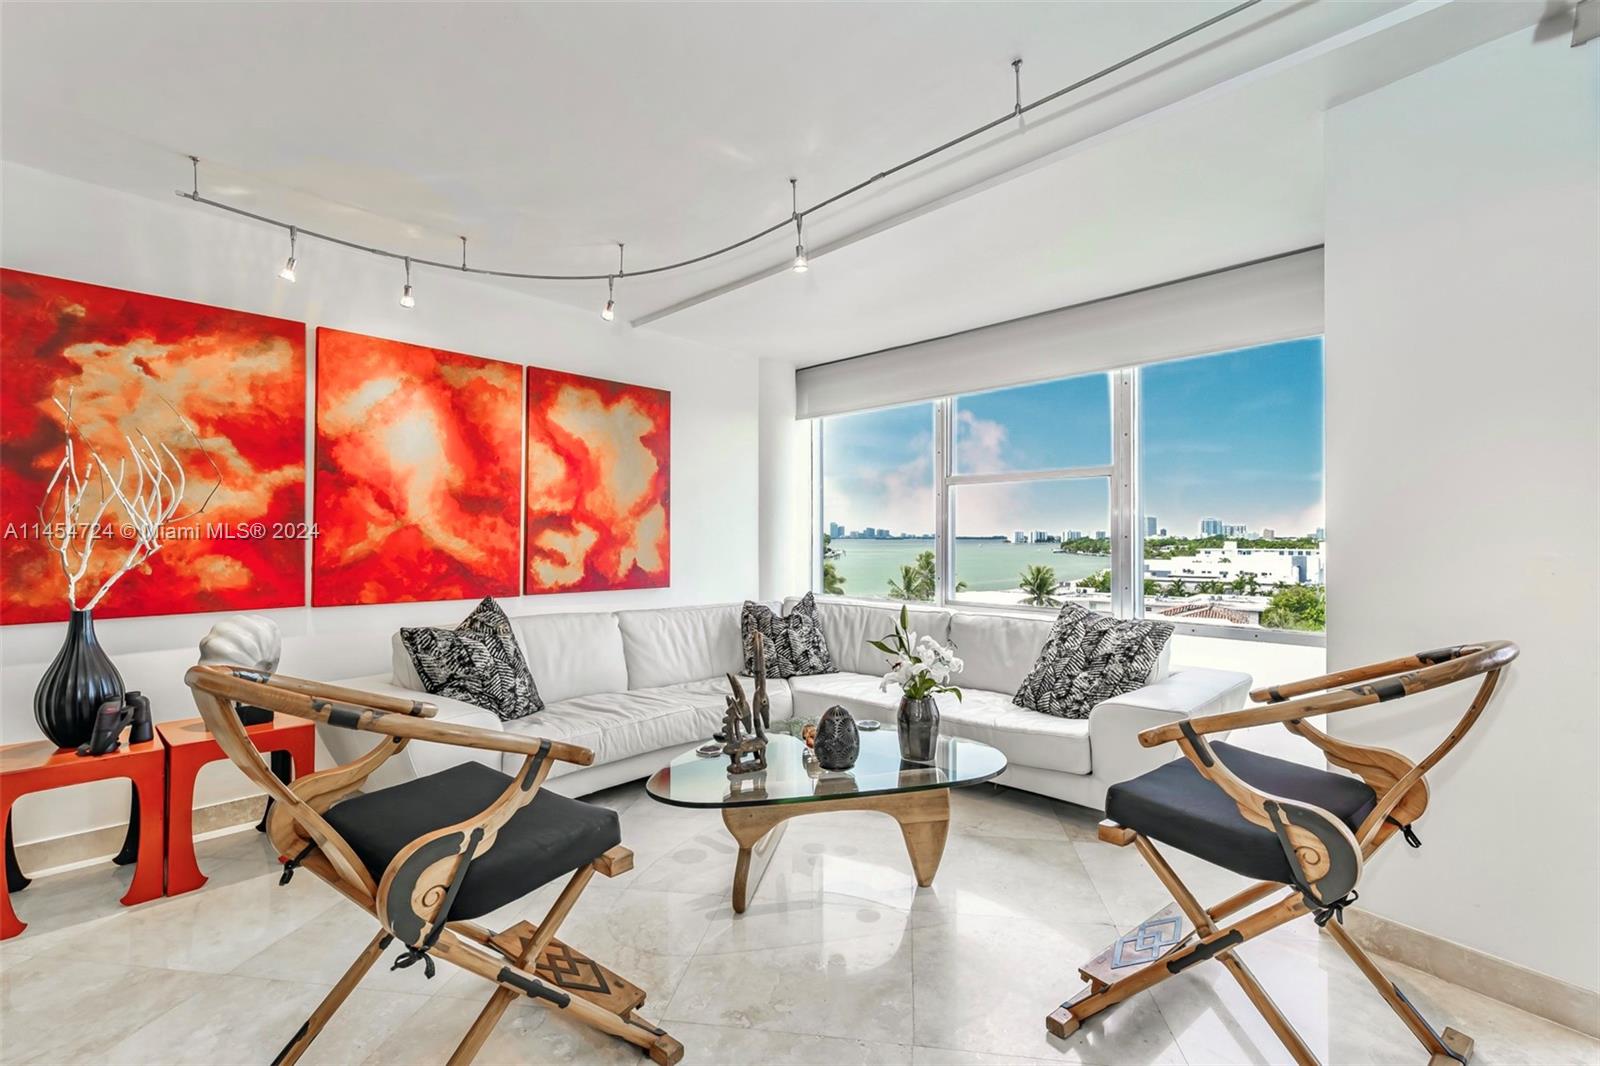 900 Bay Dr, Miami Beach, FL, 33141 United States, 1 Bedroom Bedrooms, ,1 BathroomBathrooms,Residential,For Sale,Bay Dr,A11454724